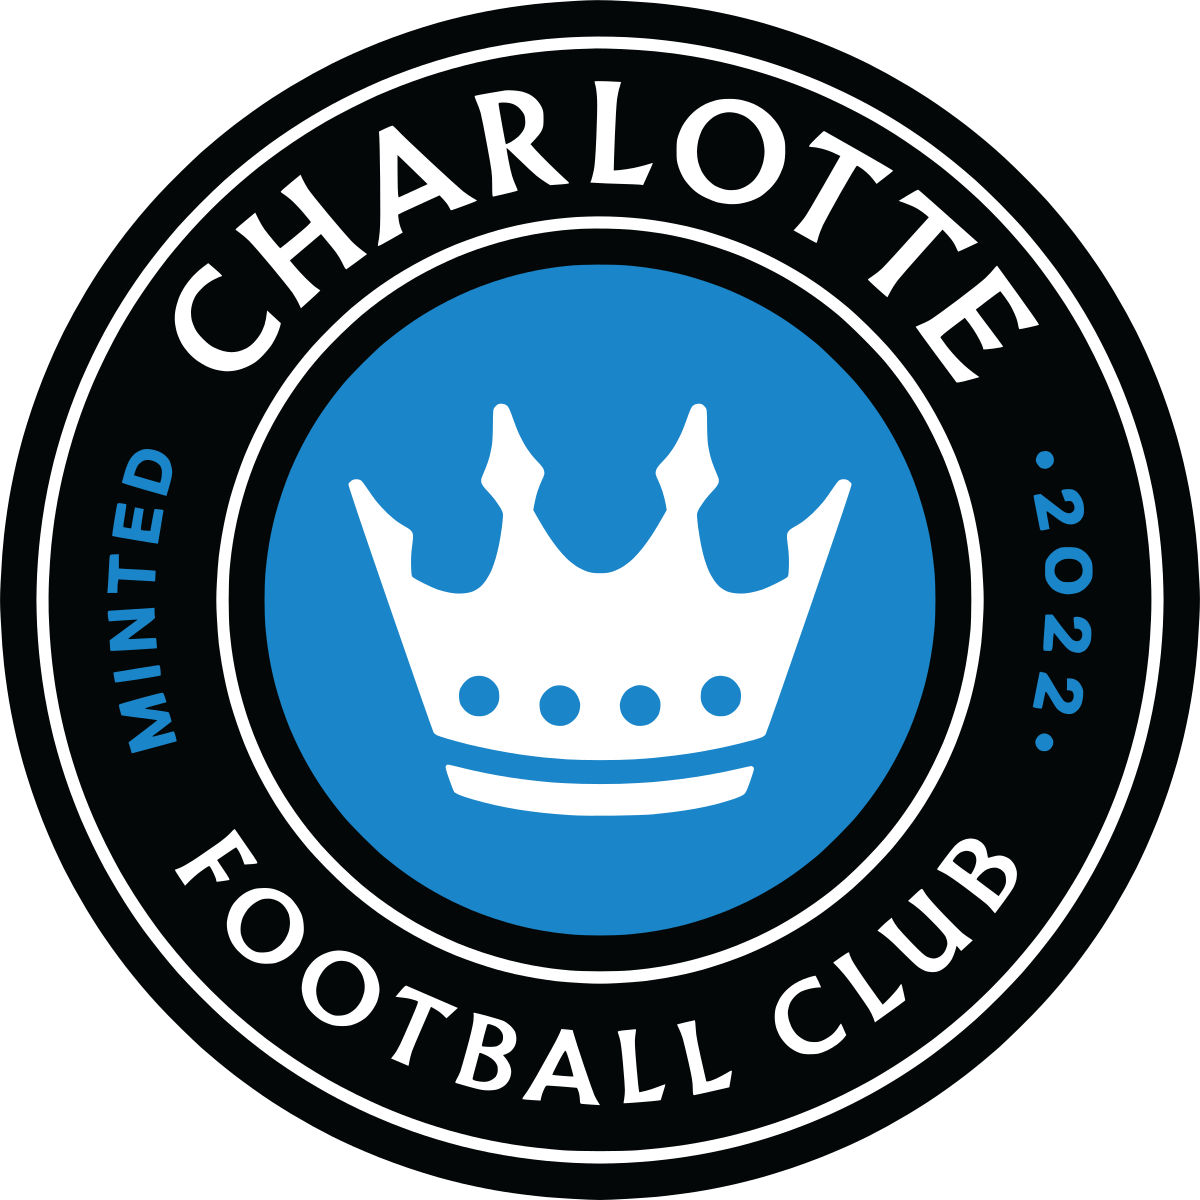 Nashville SC vs Charlotte FC Prediction: Hard to pick an outright winner for this one. 